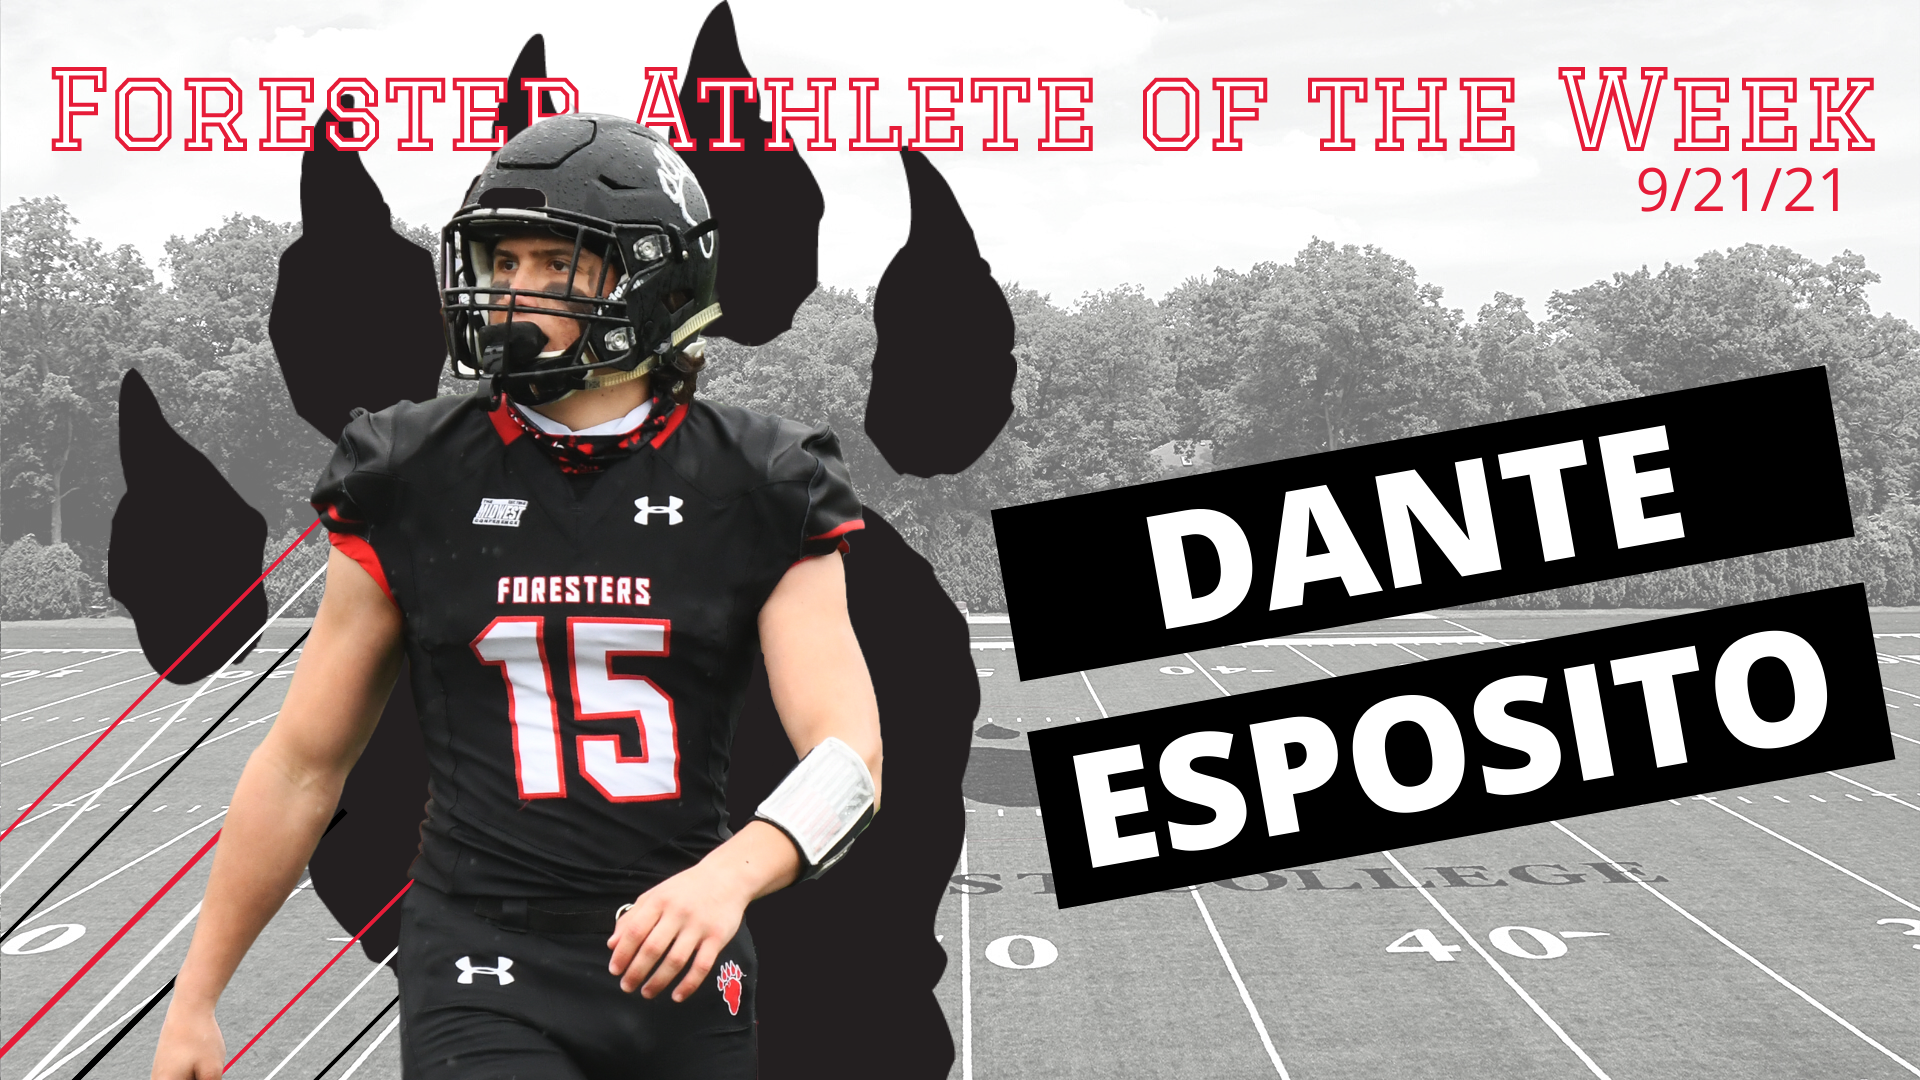 Dante Esposito Earns Men's Forester Athlete of the Week Honors